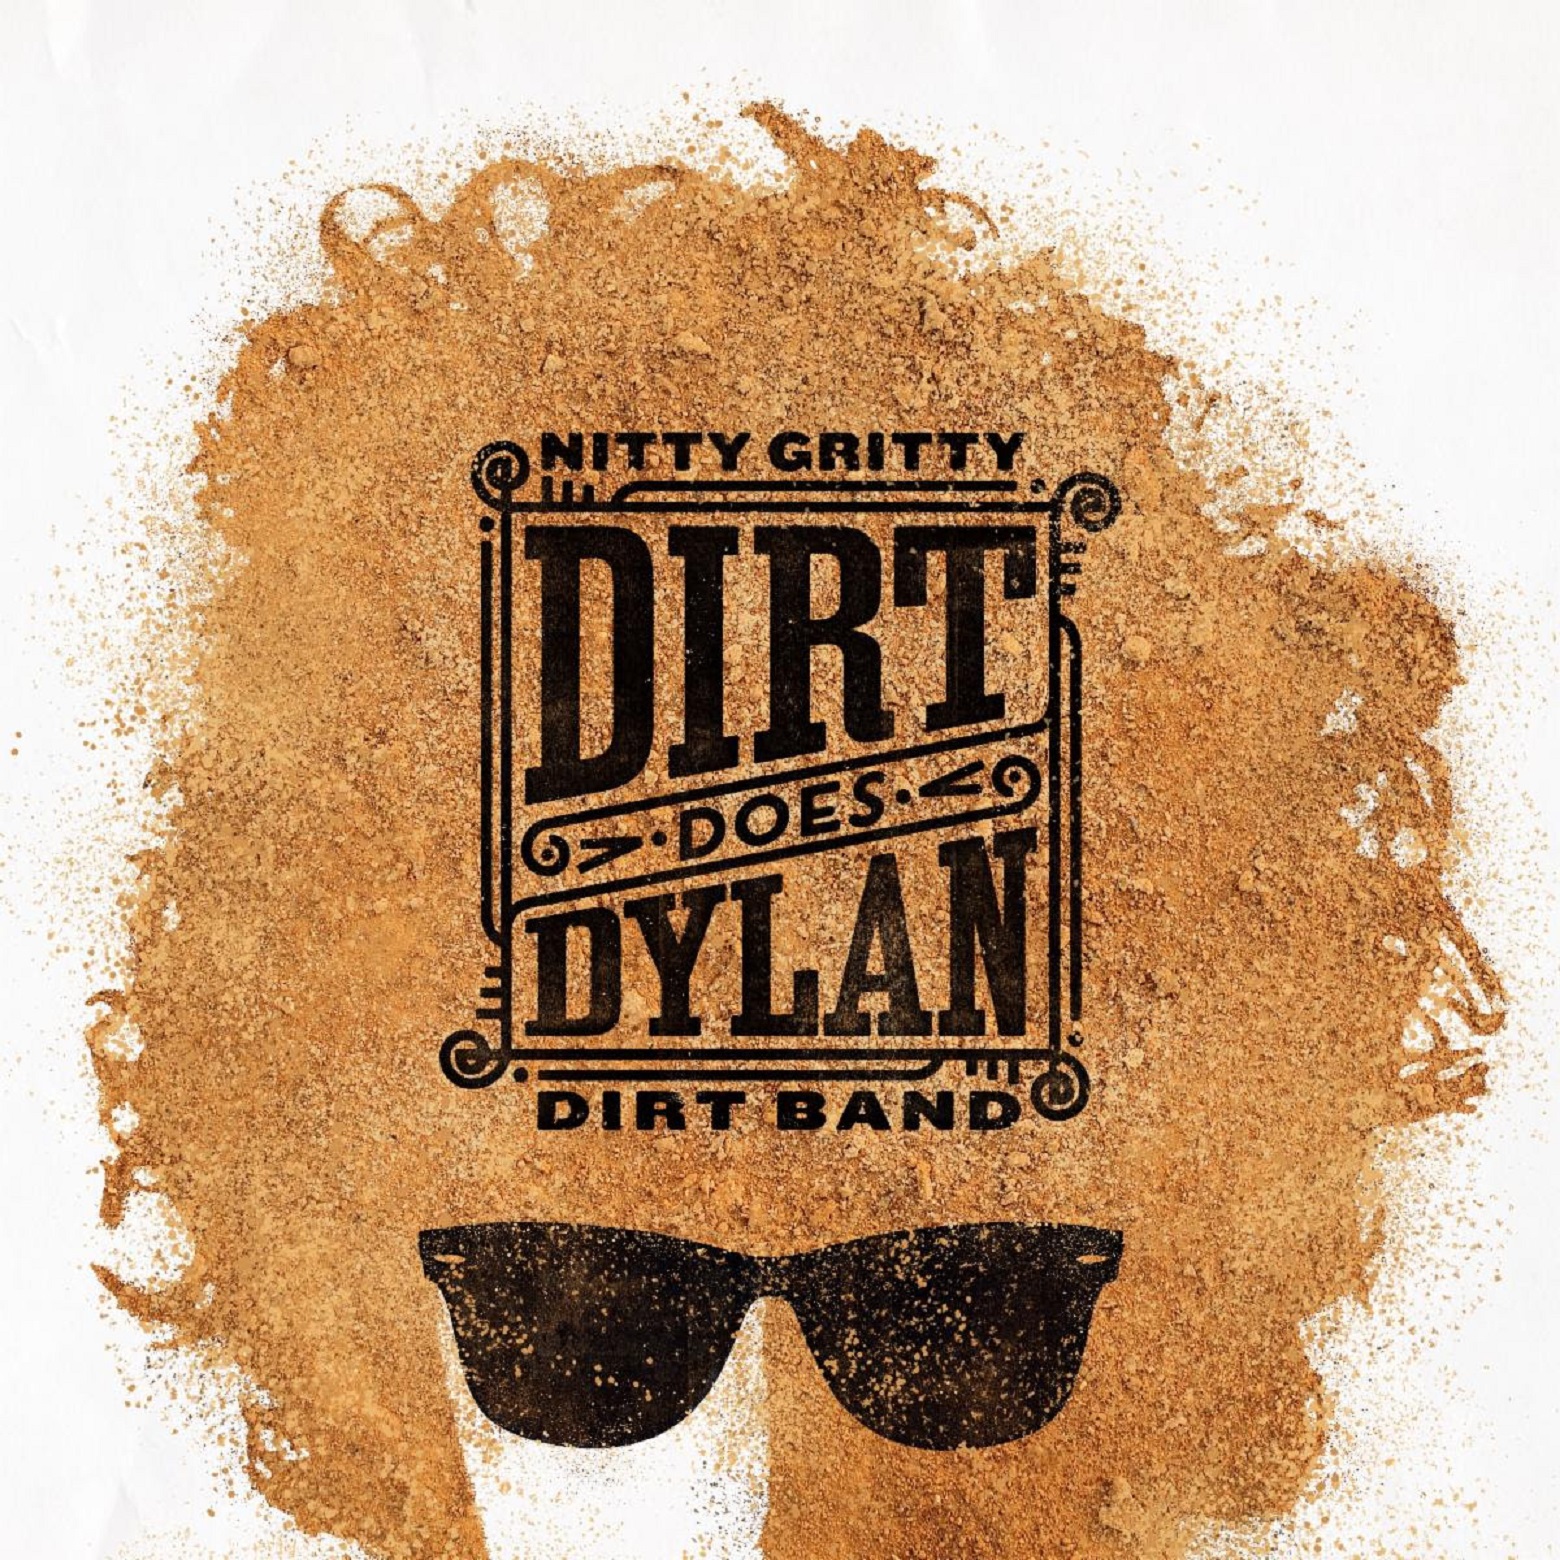 Nitty Gritty Dirt Band Releases "Dirt Does Dylan"